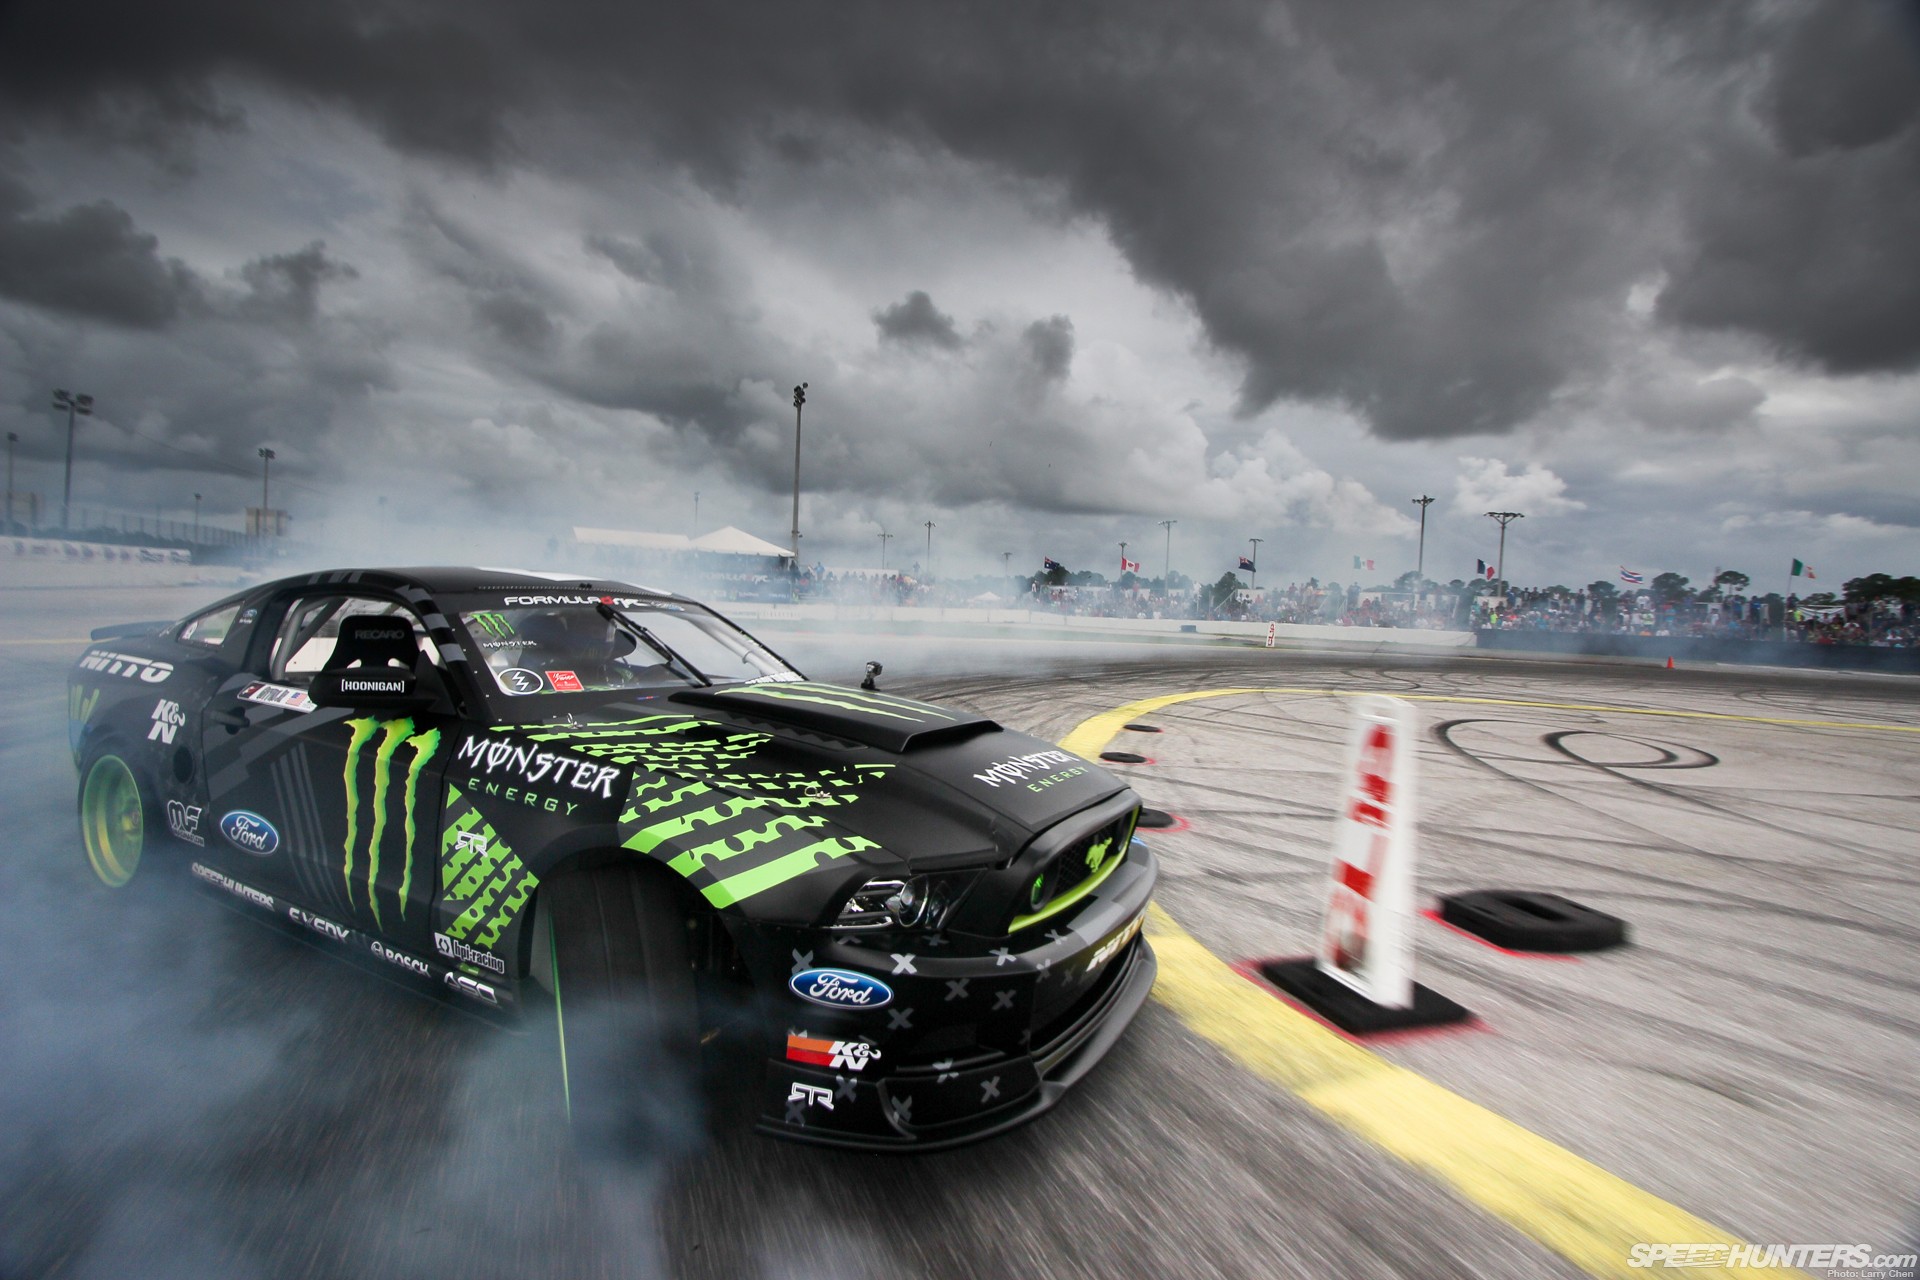 Drifting racer. Monster Energy Ford Mustang RTR. Форд Мустанг дрифт. Ford Mustang Drift Monster Energy. Мустанг РТР Монстер.